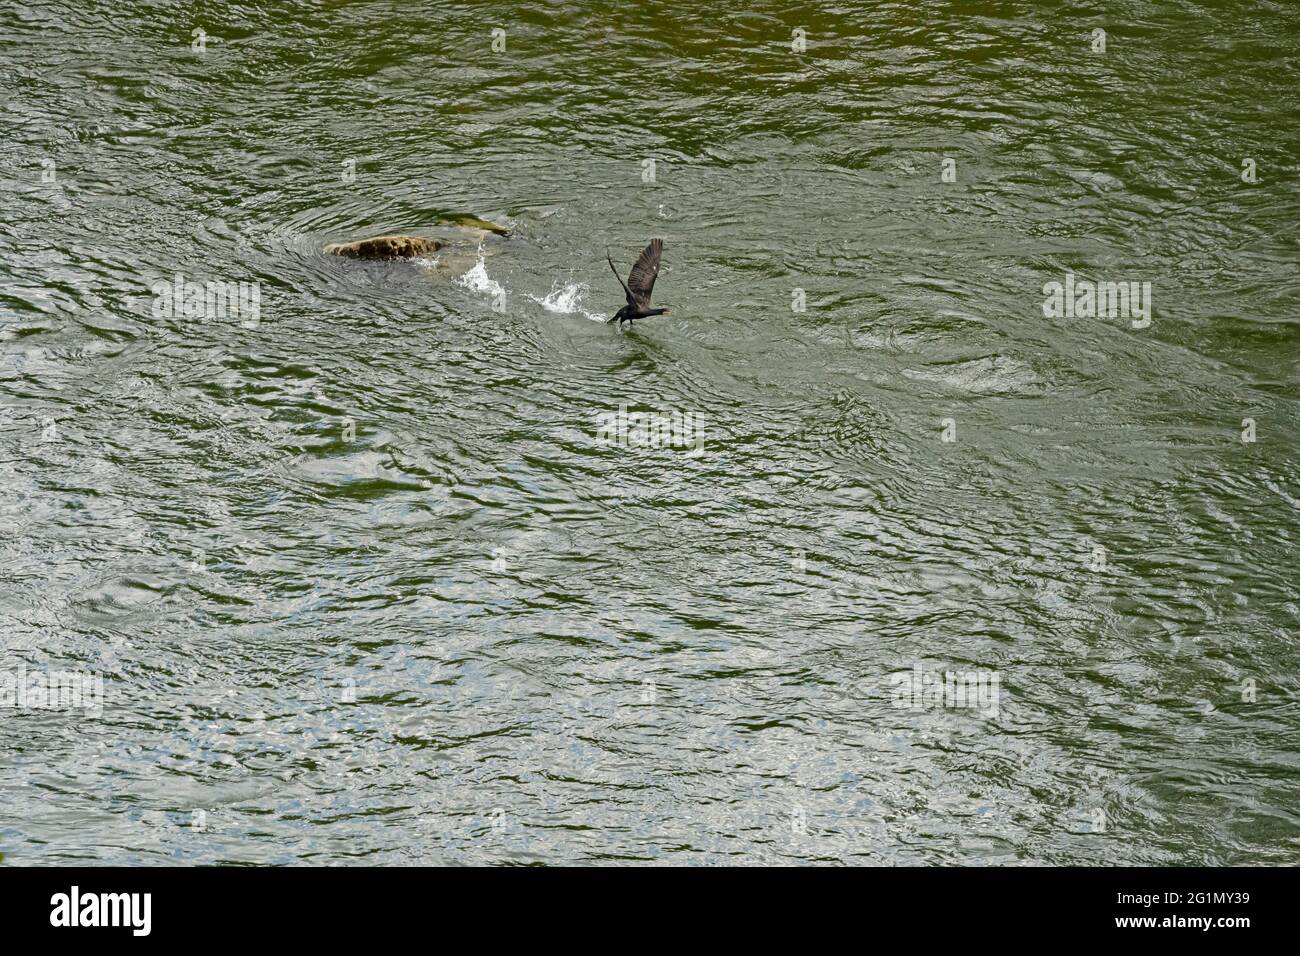 France, Ain, Ain river, cormorant on the Ain river (aerial view) Stock Photo